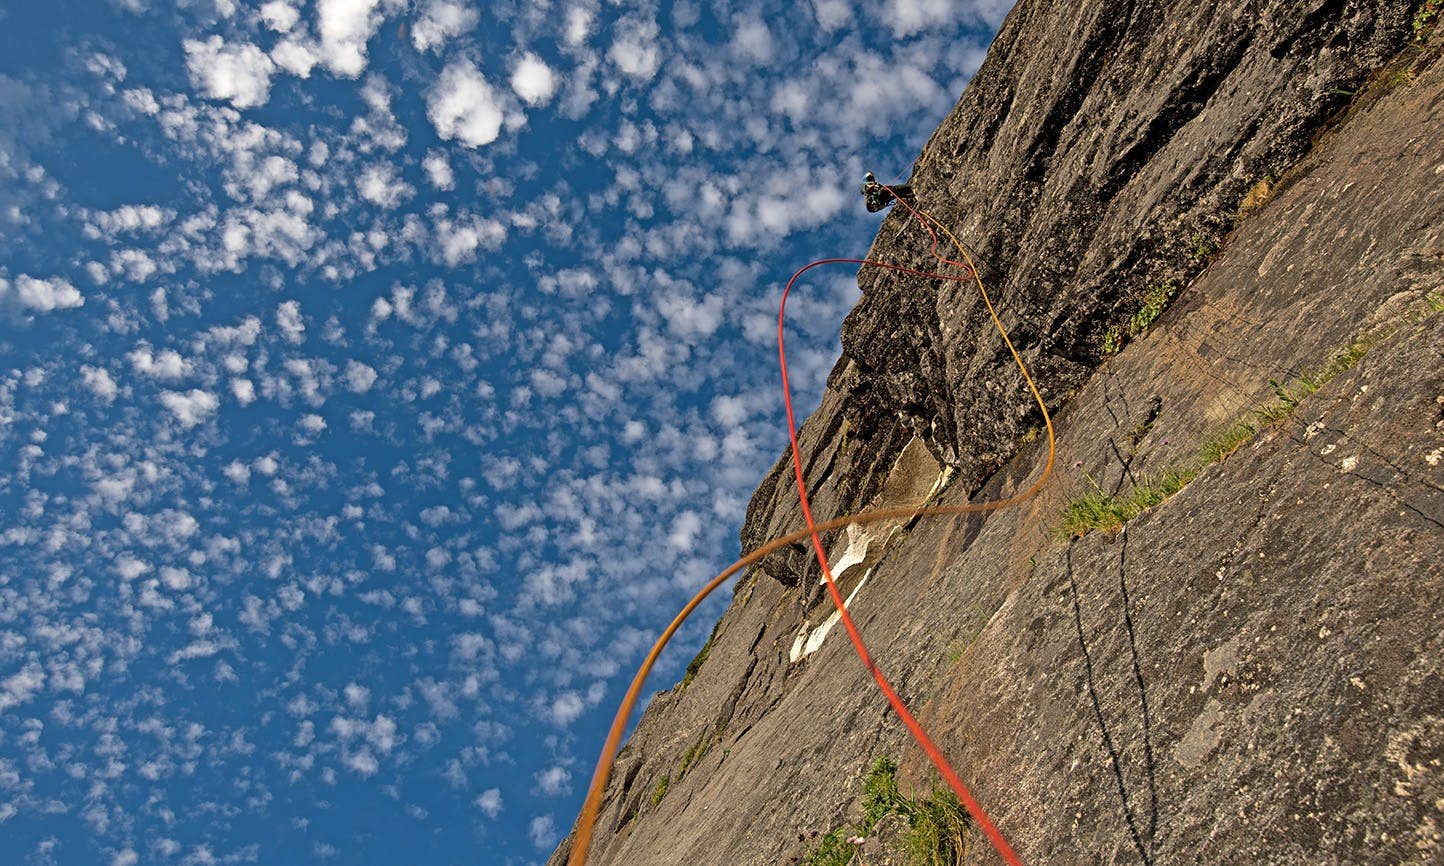 A climber far above the viewpoint shakes the orange ropes so they wave away from the rock face, silhouetted against a blue sky dotted with clouds.